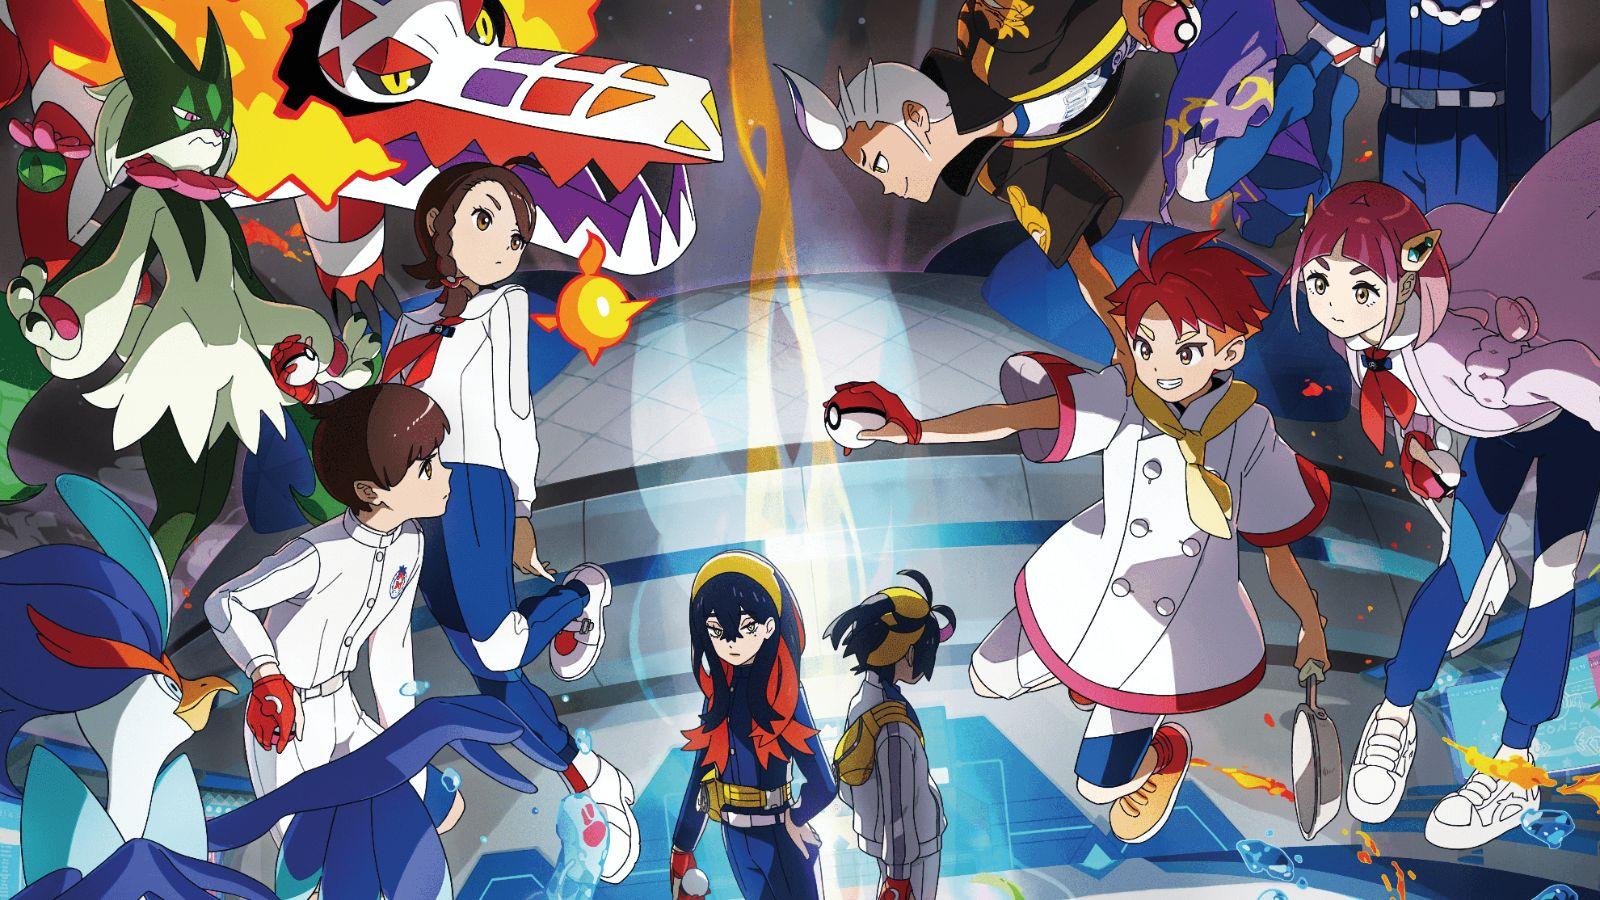 Player Poll: Which Pokémon Scarlet & Violet starter has the best